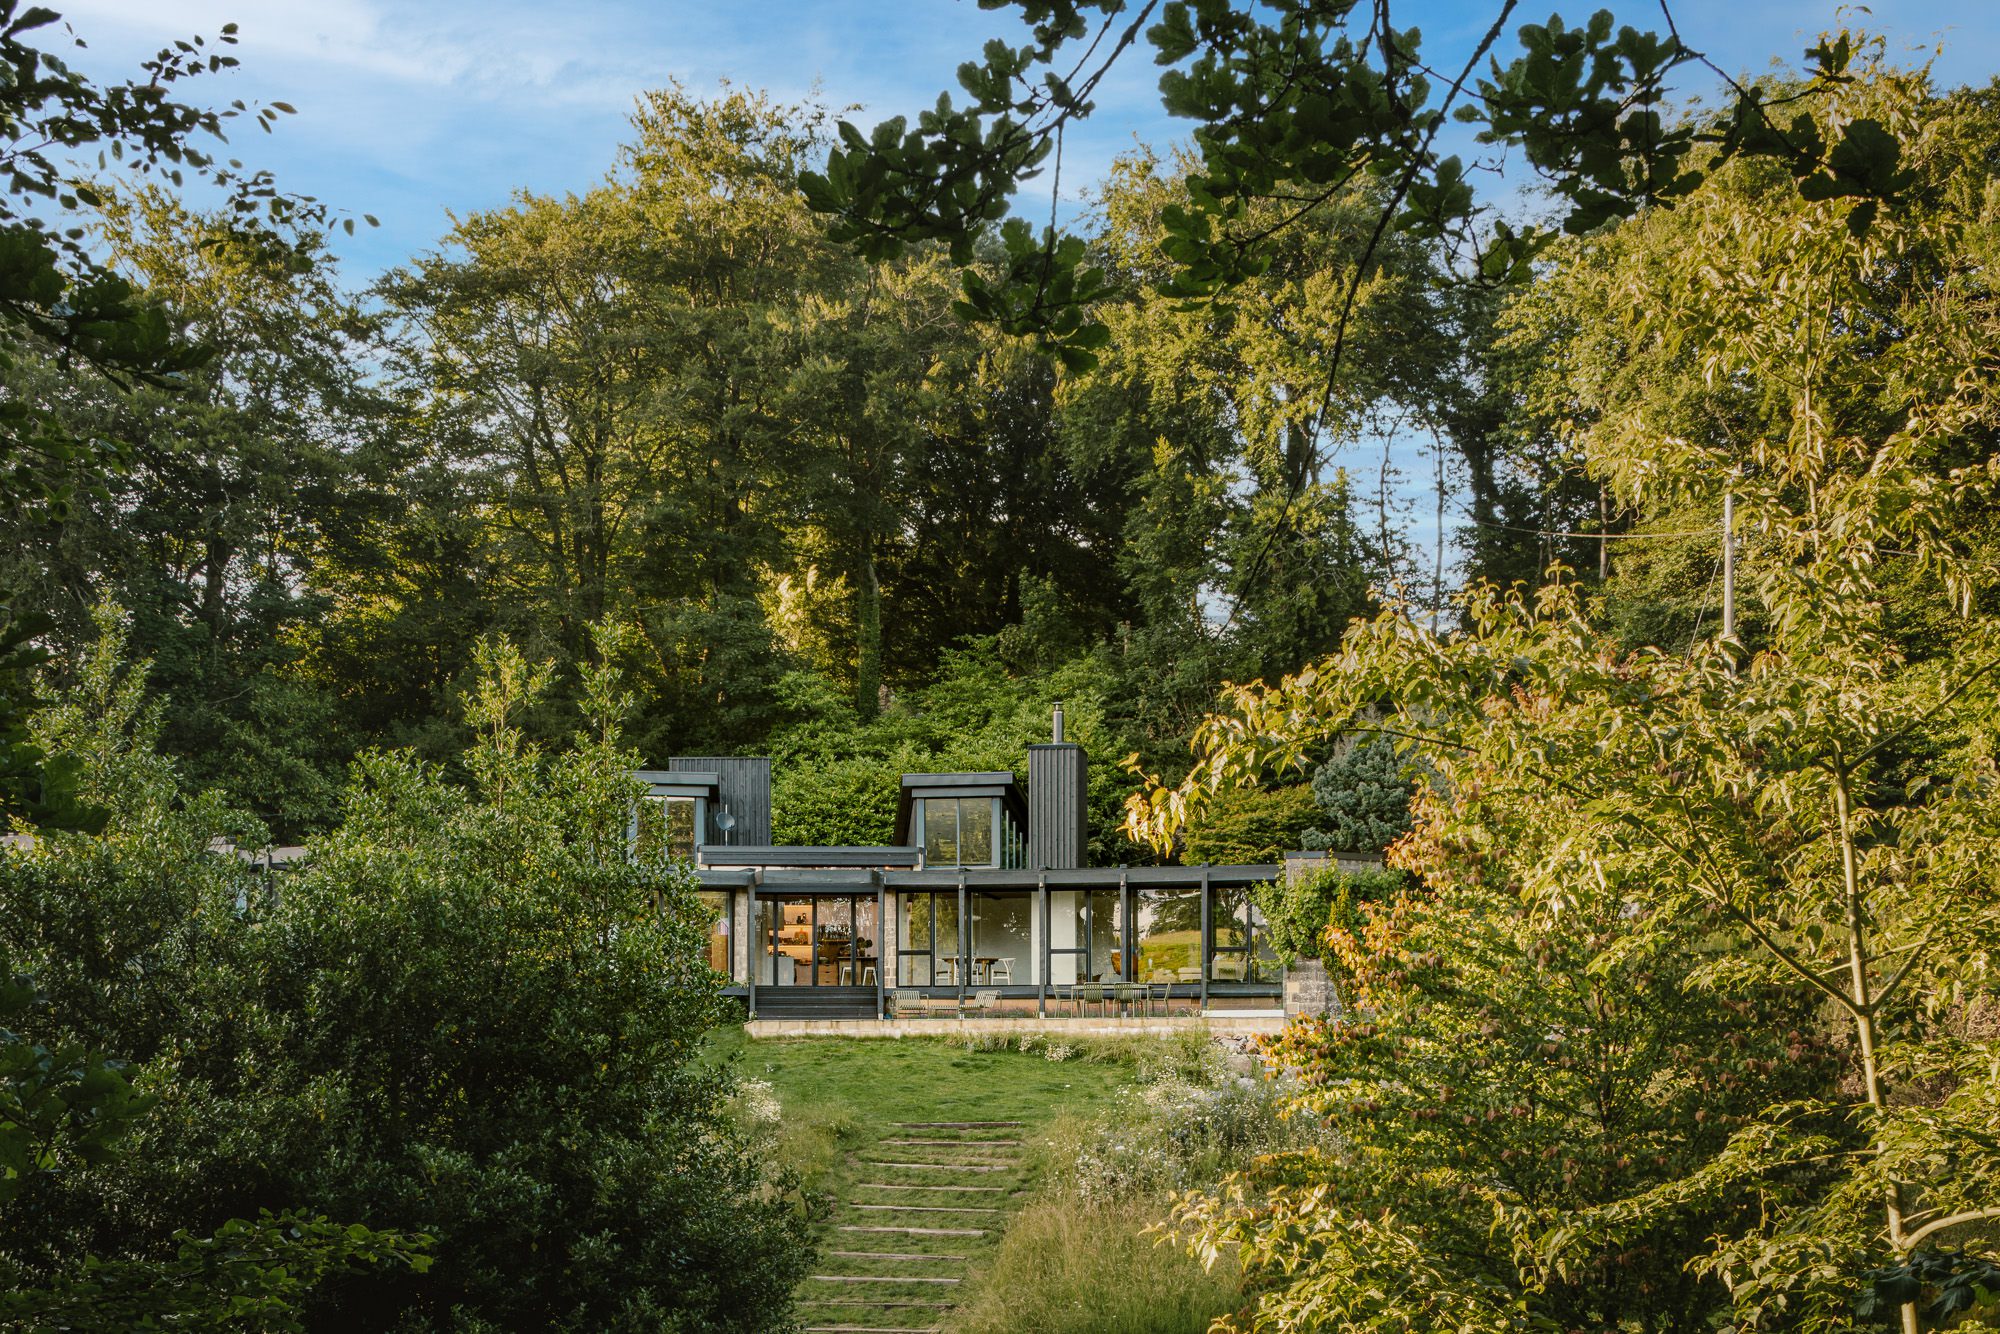 Capture from the bottom, featuring the upper portion of a house surrounded by trees with a clear sky in the background, and showcasing a window of the home, photographed by Brett Charles for building photography in the UK